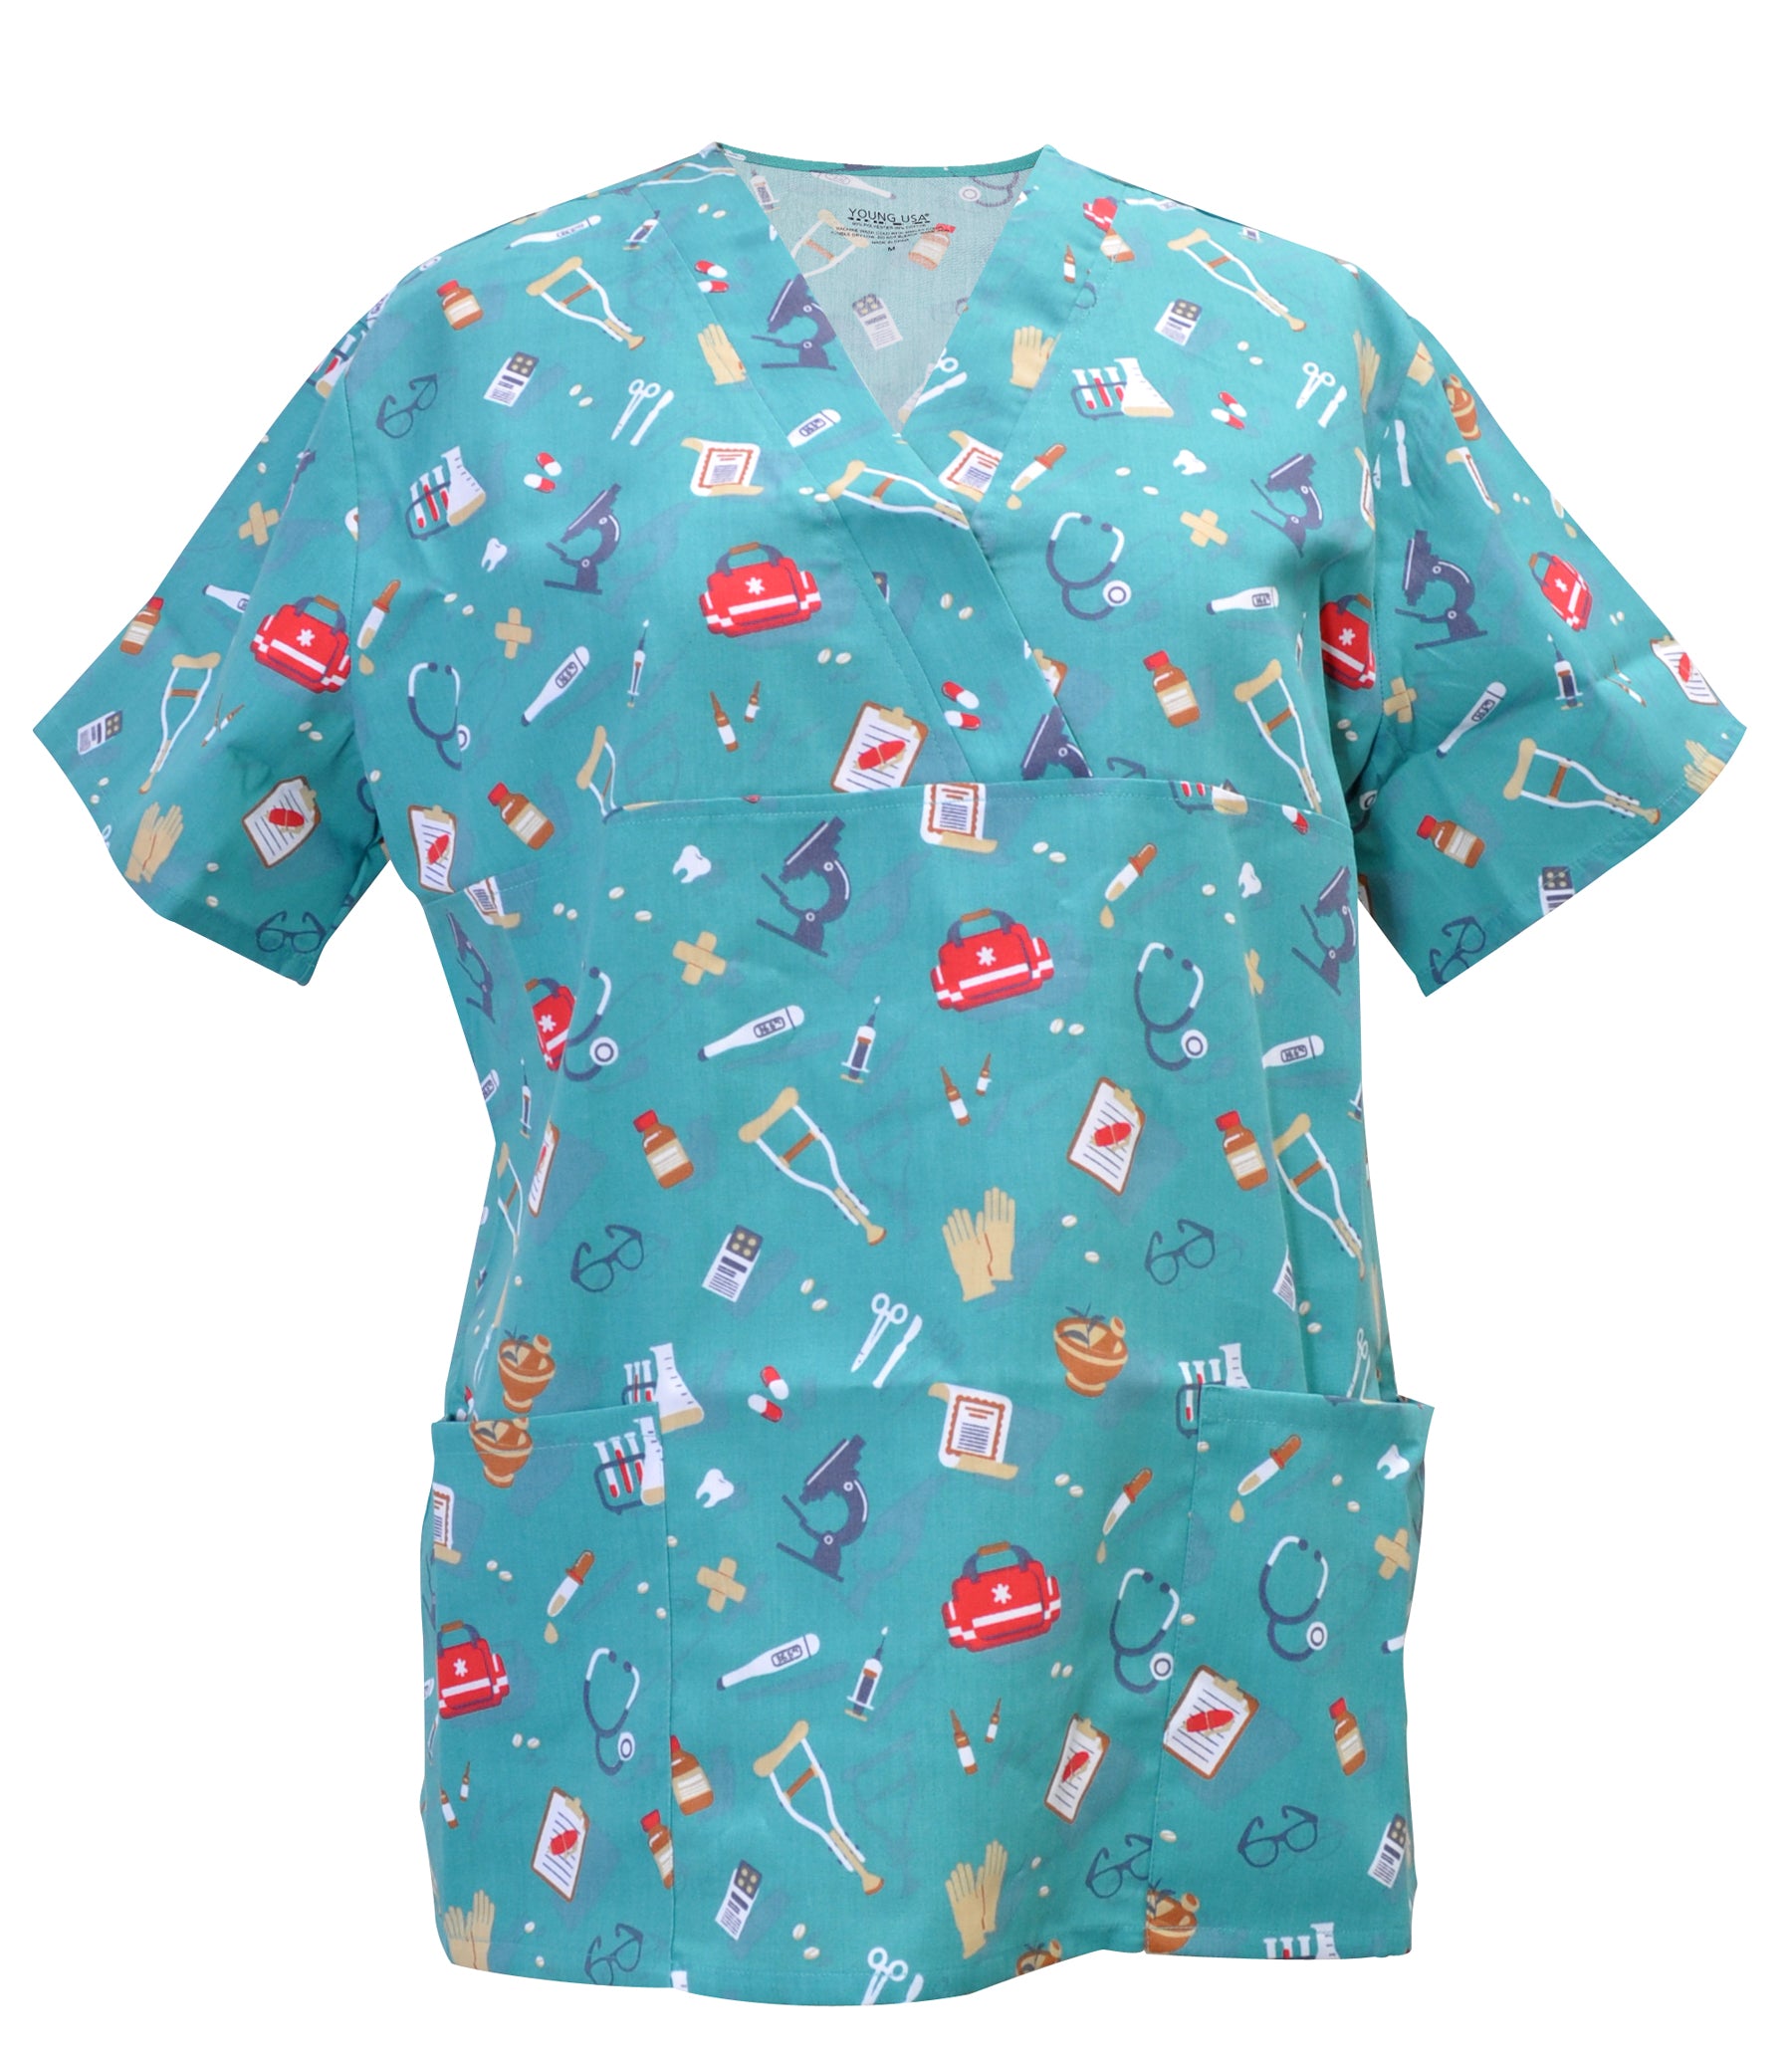 Young USA Ladies Scrub Top in Turquoise